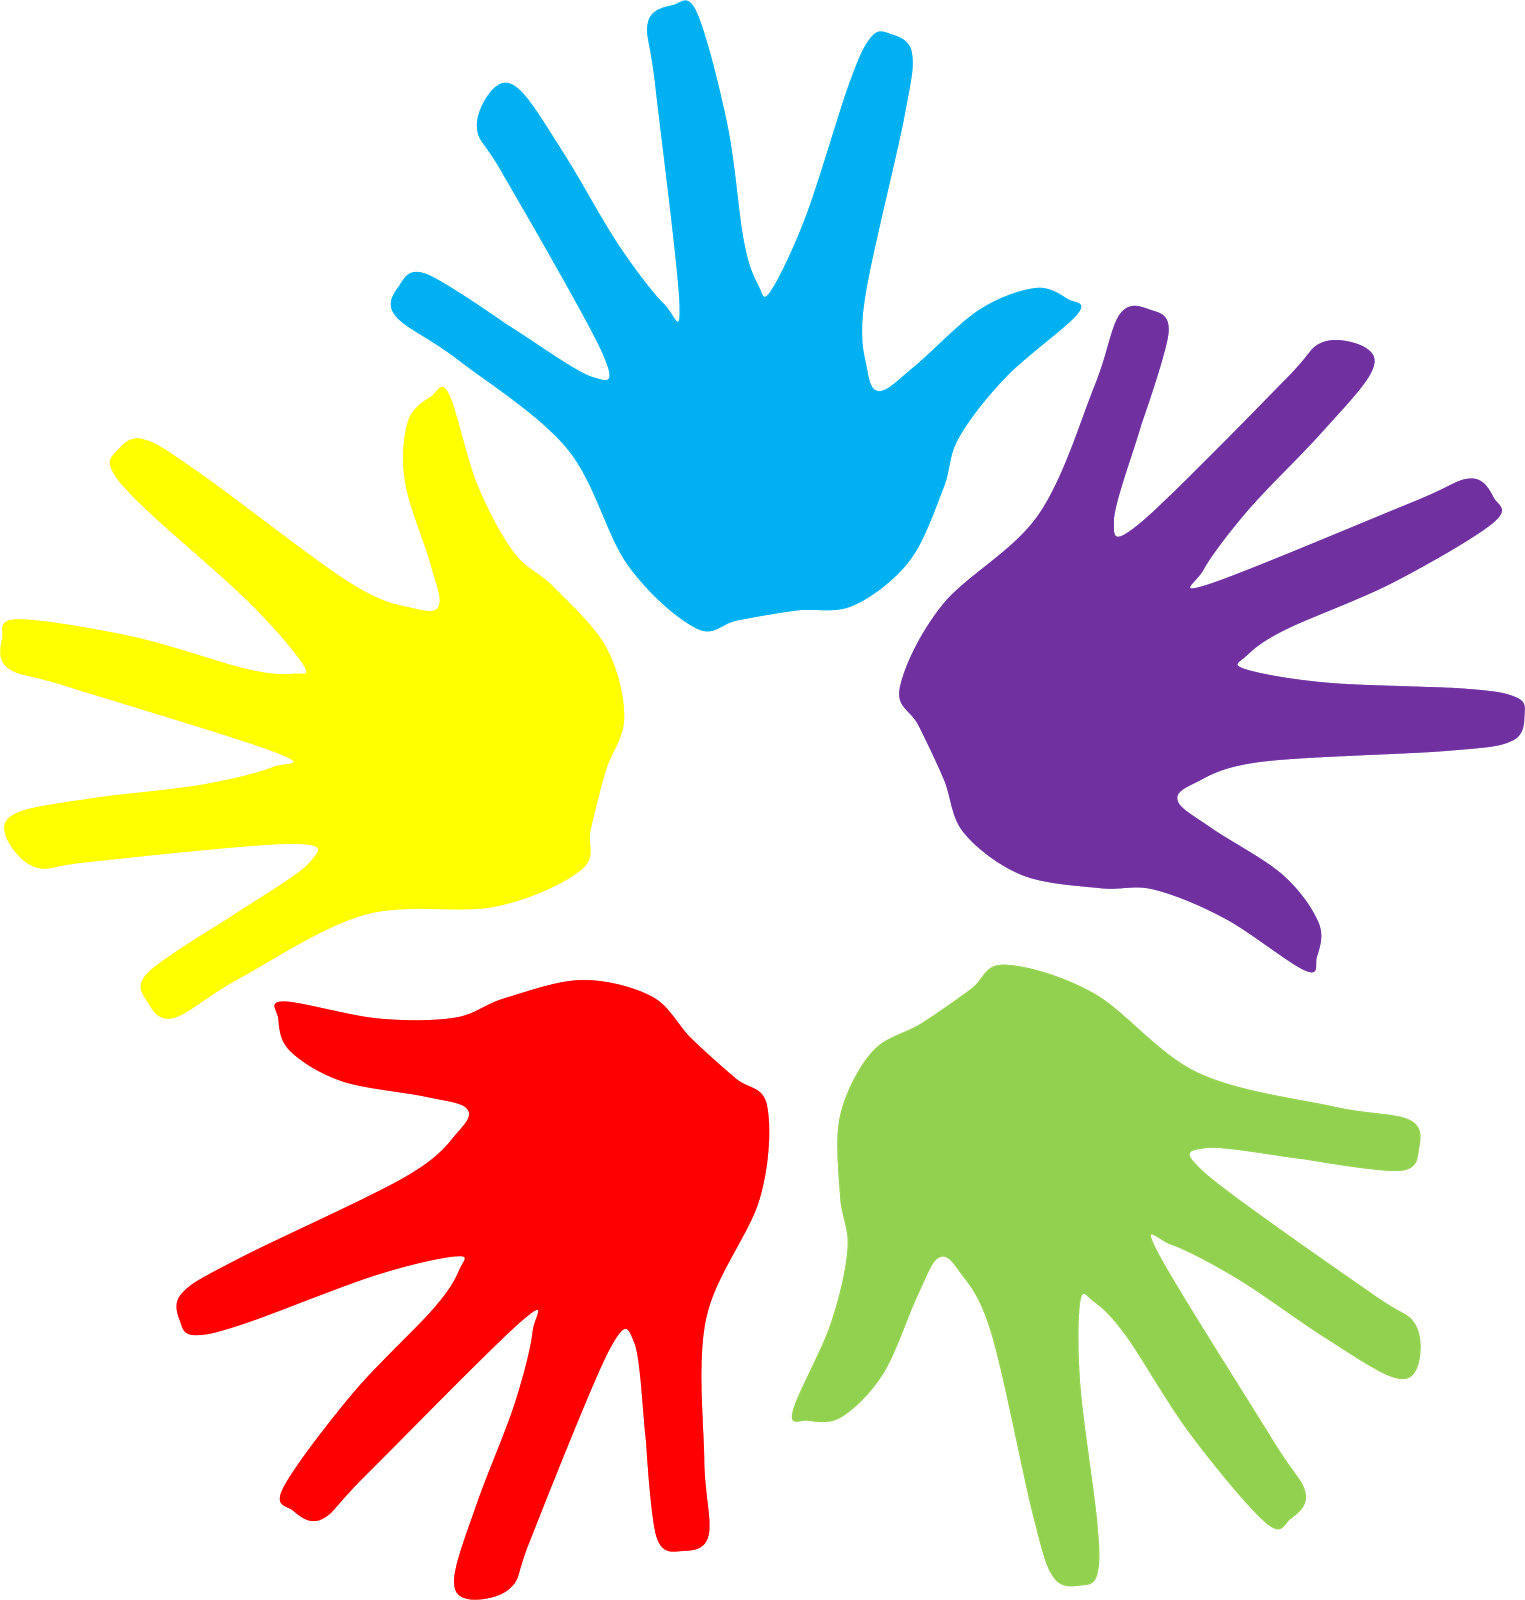 Colorful Hands clipart